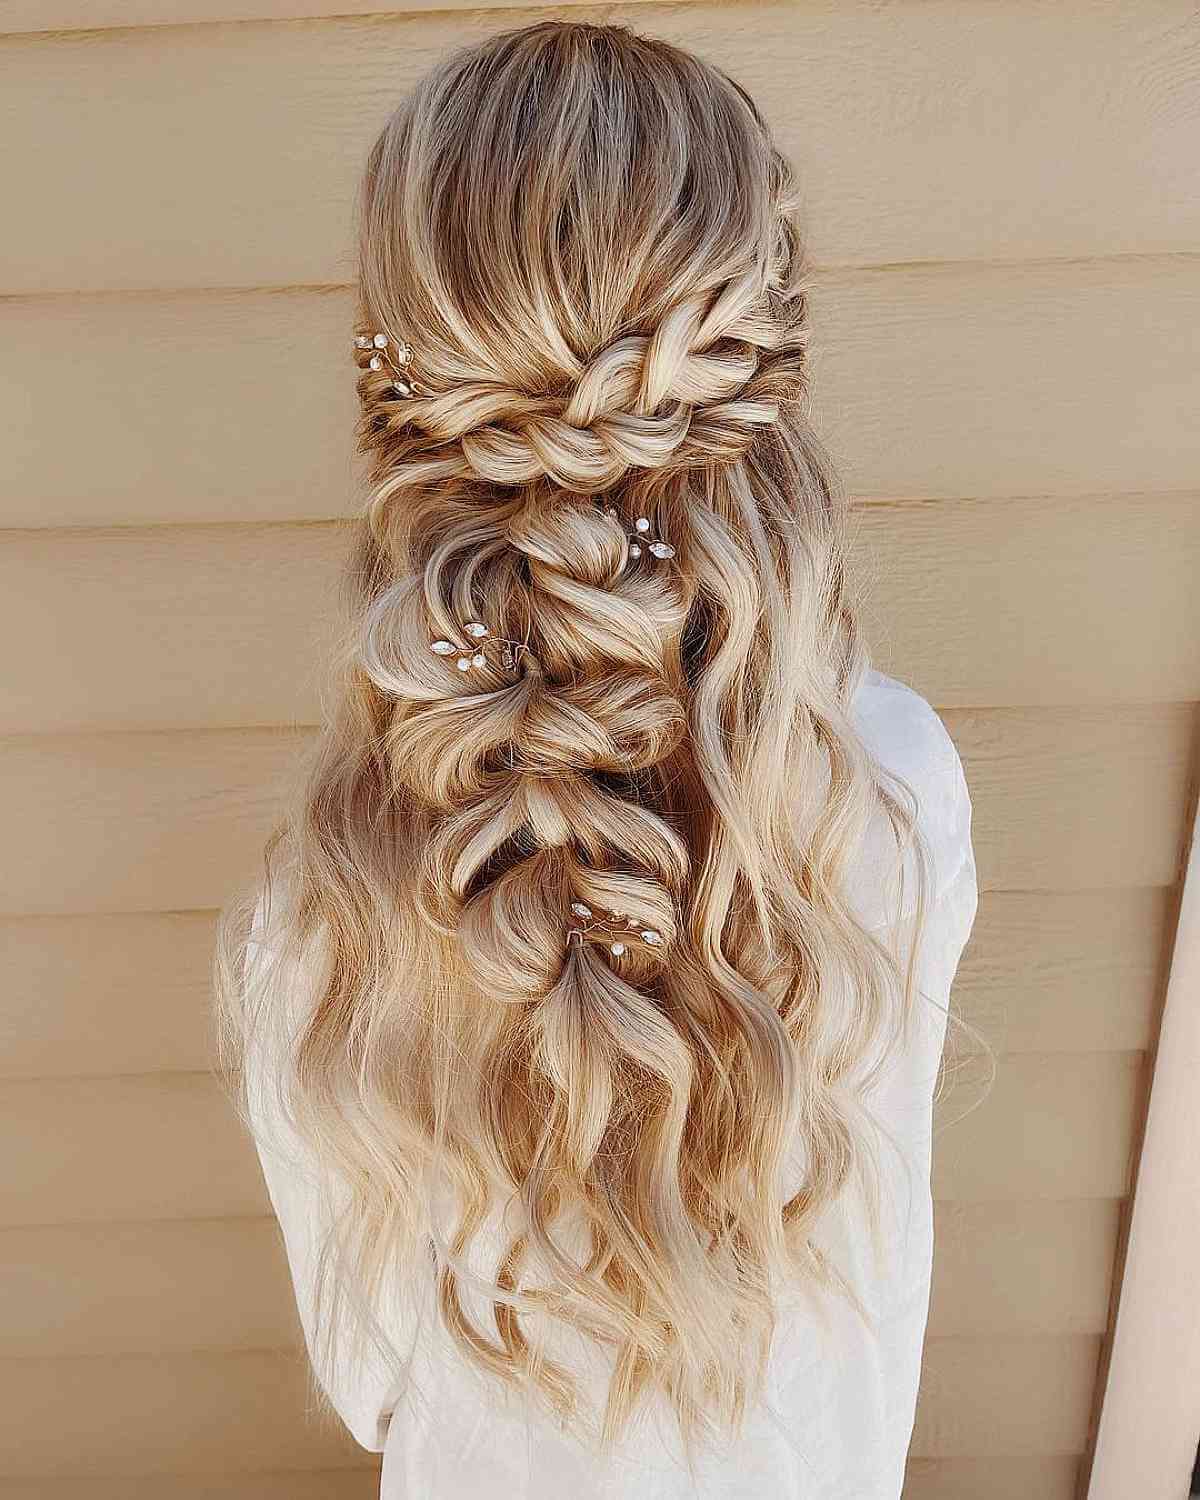 27 Pretty Prom Hairstyles For Short, Medium And Long Hair (2019 Update)